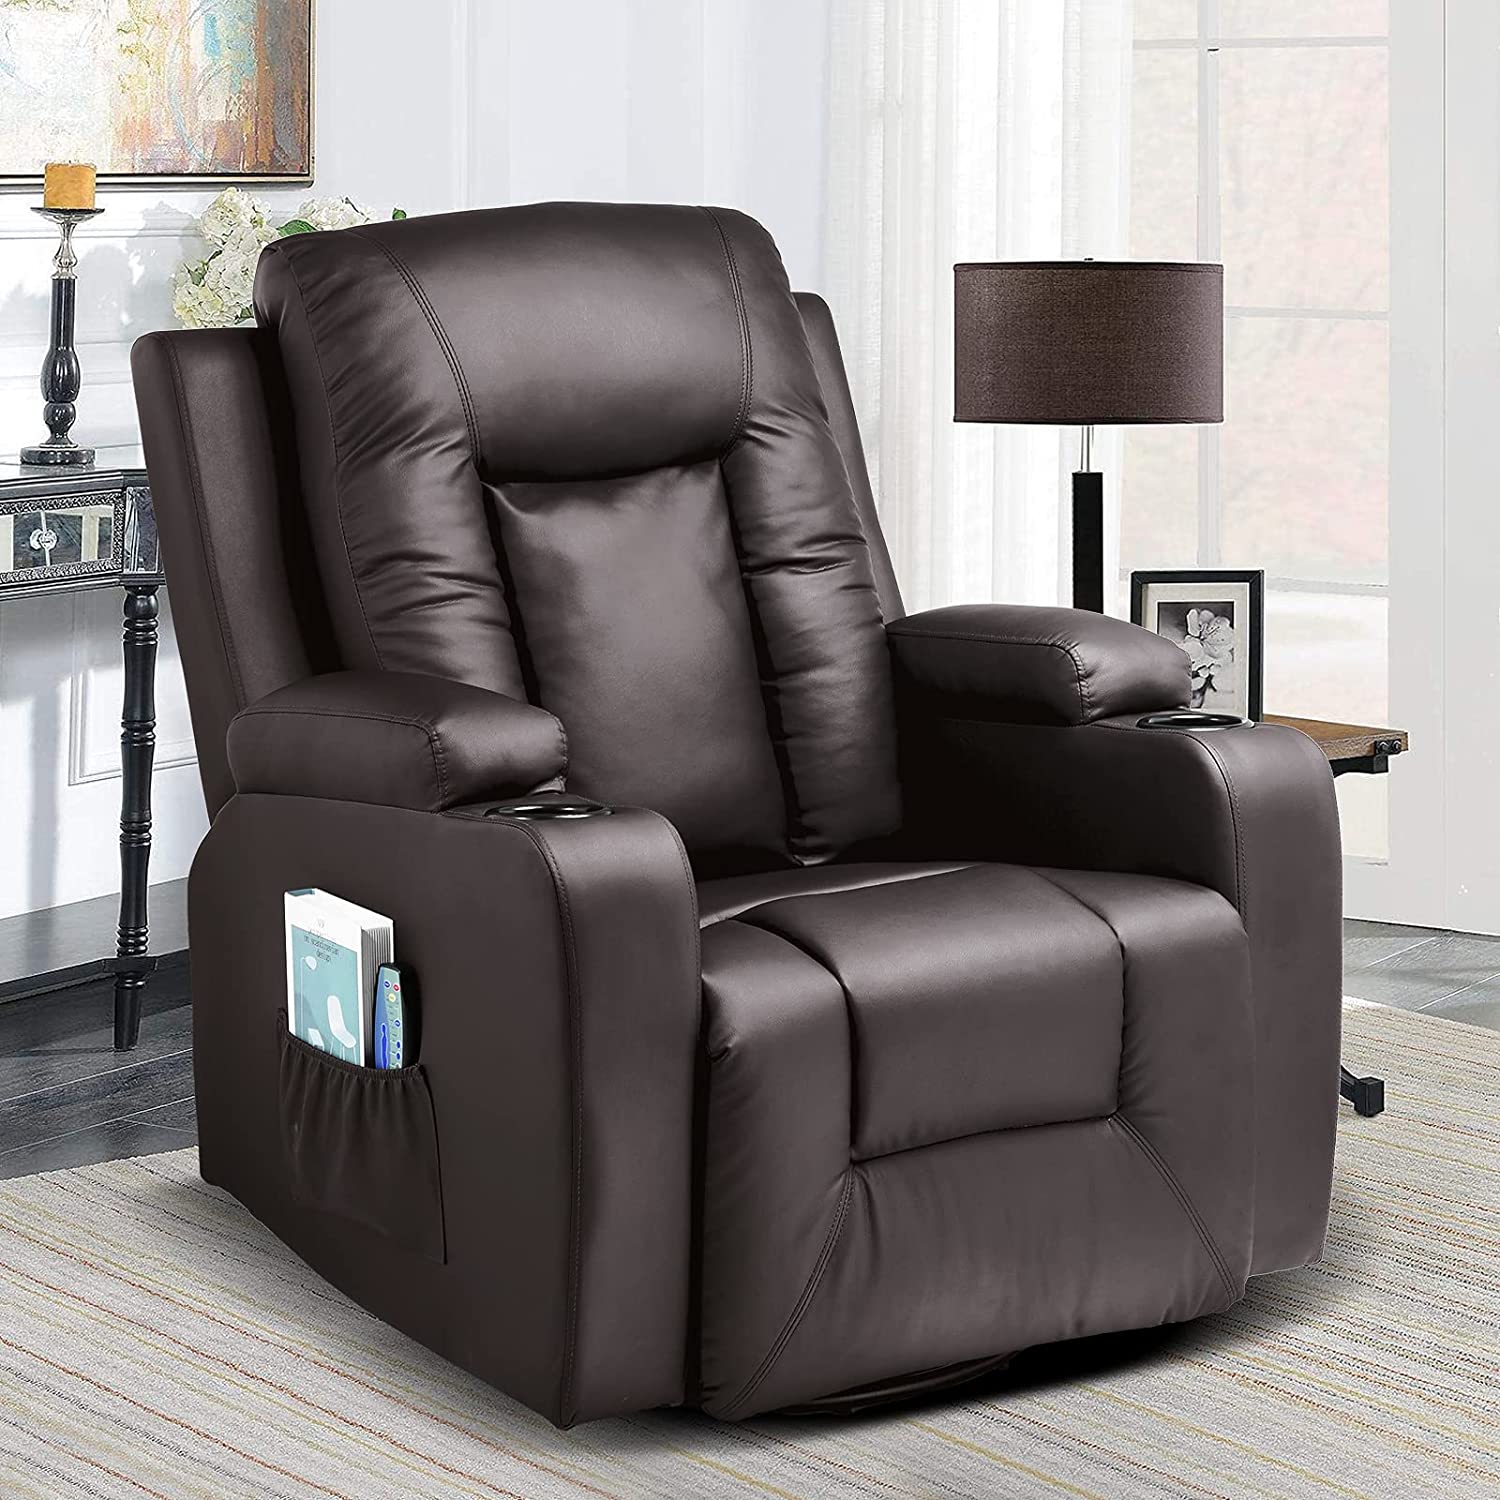 ComHoma Leather Recliner